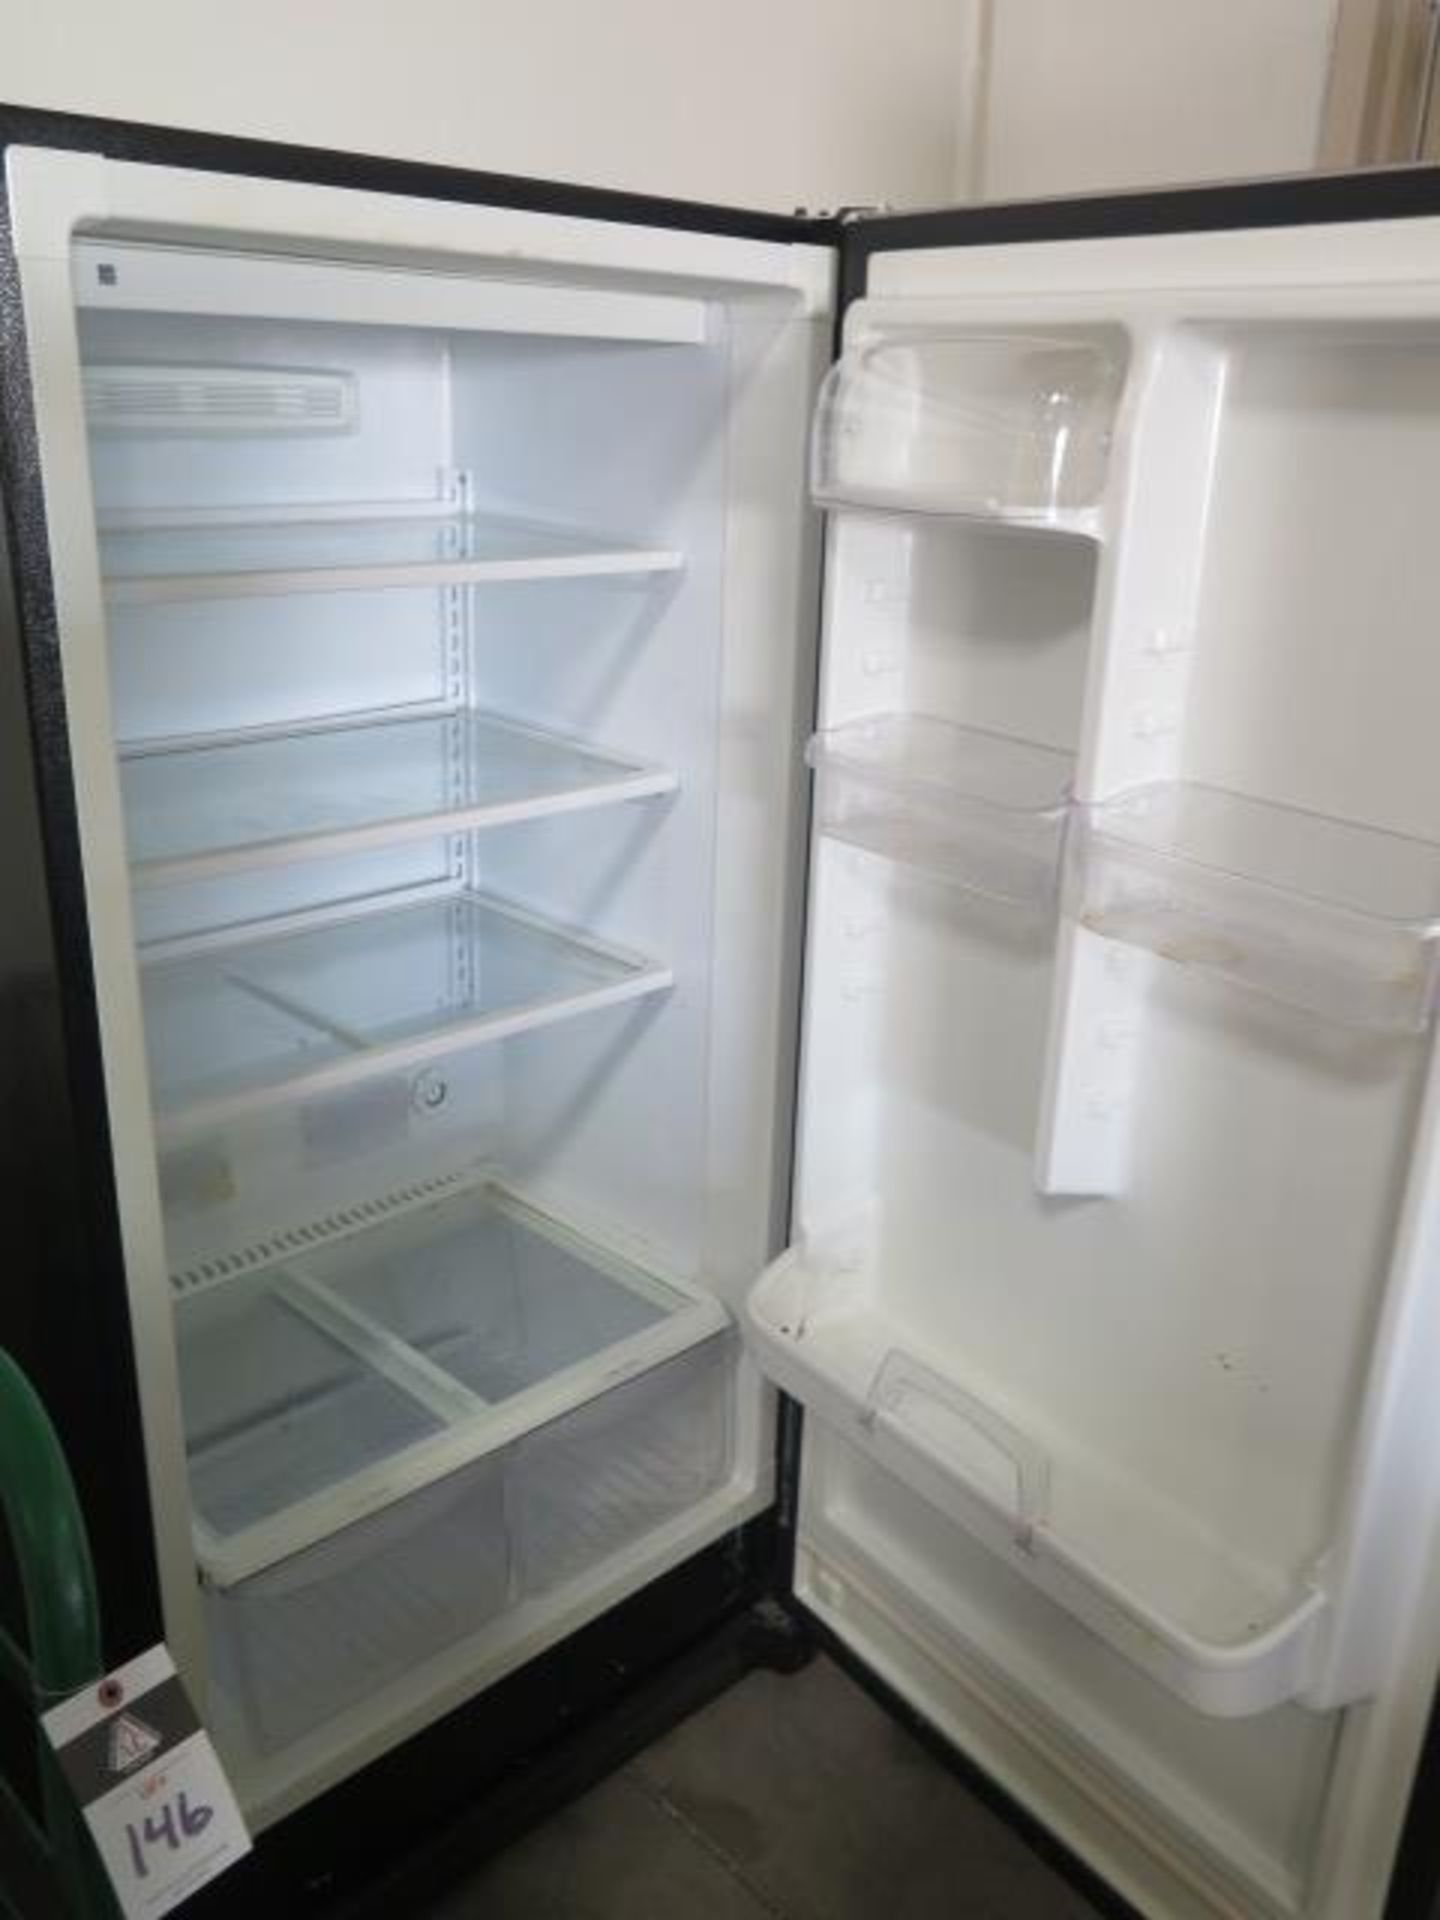 Refrigerator, Microwaves and File Cabinet (SOLD AS-IS - NO WARRANTY) - Image 3 of 5